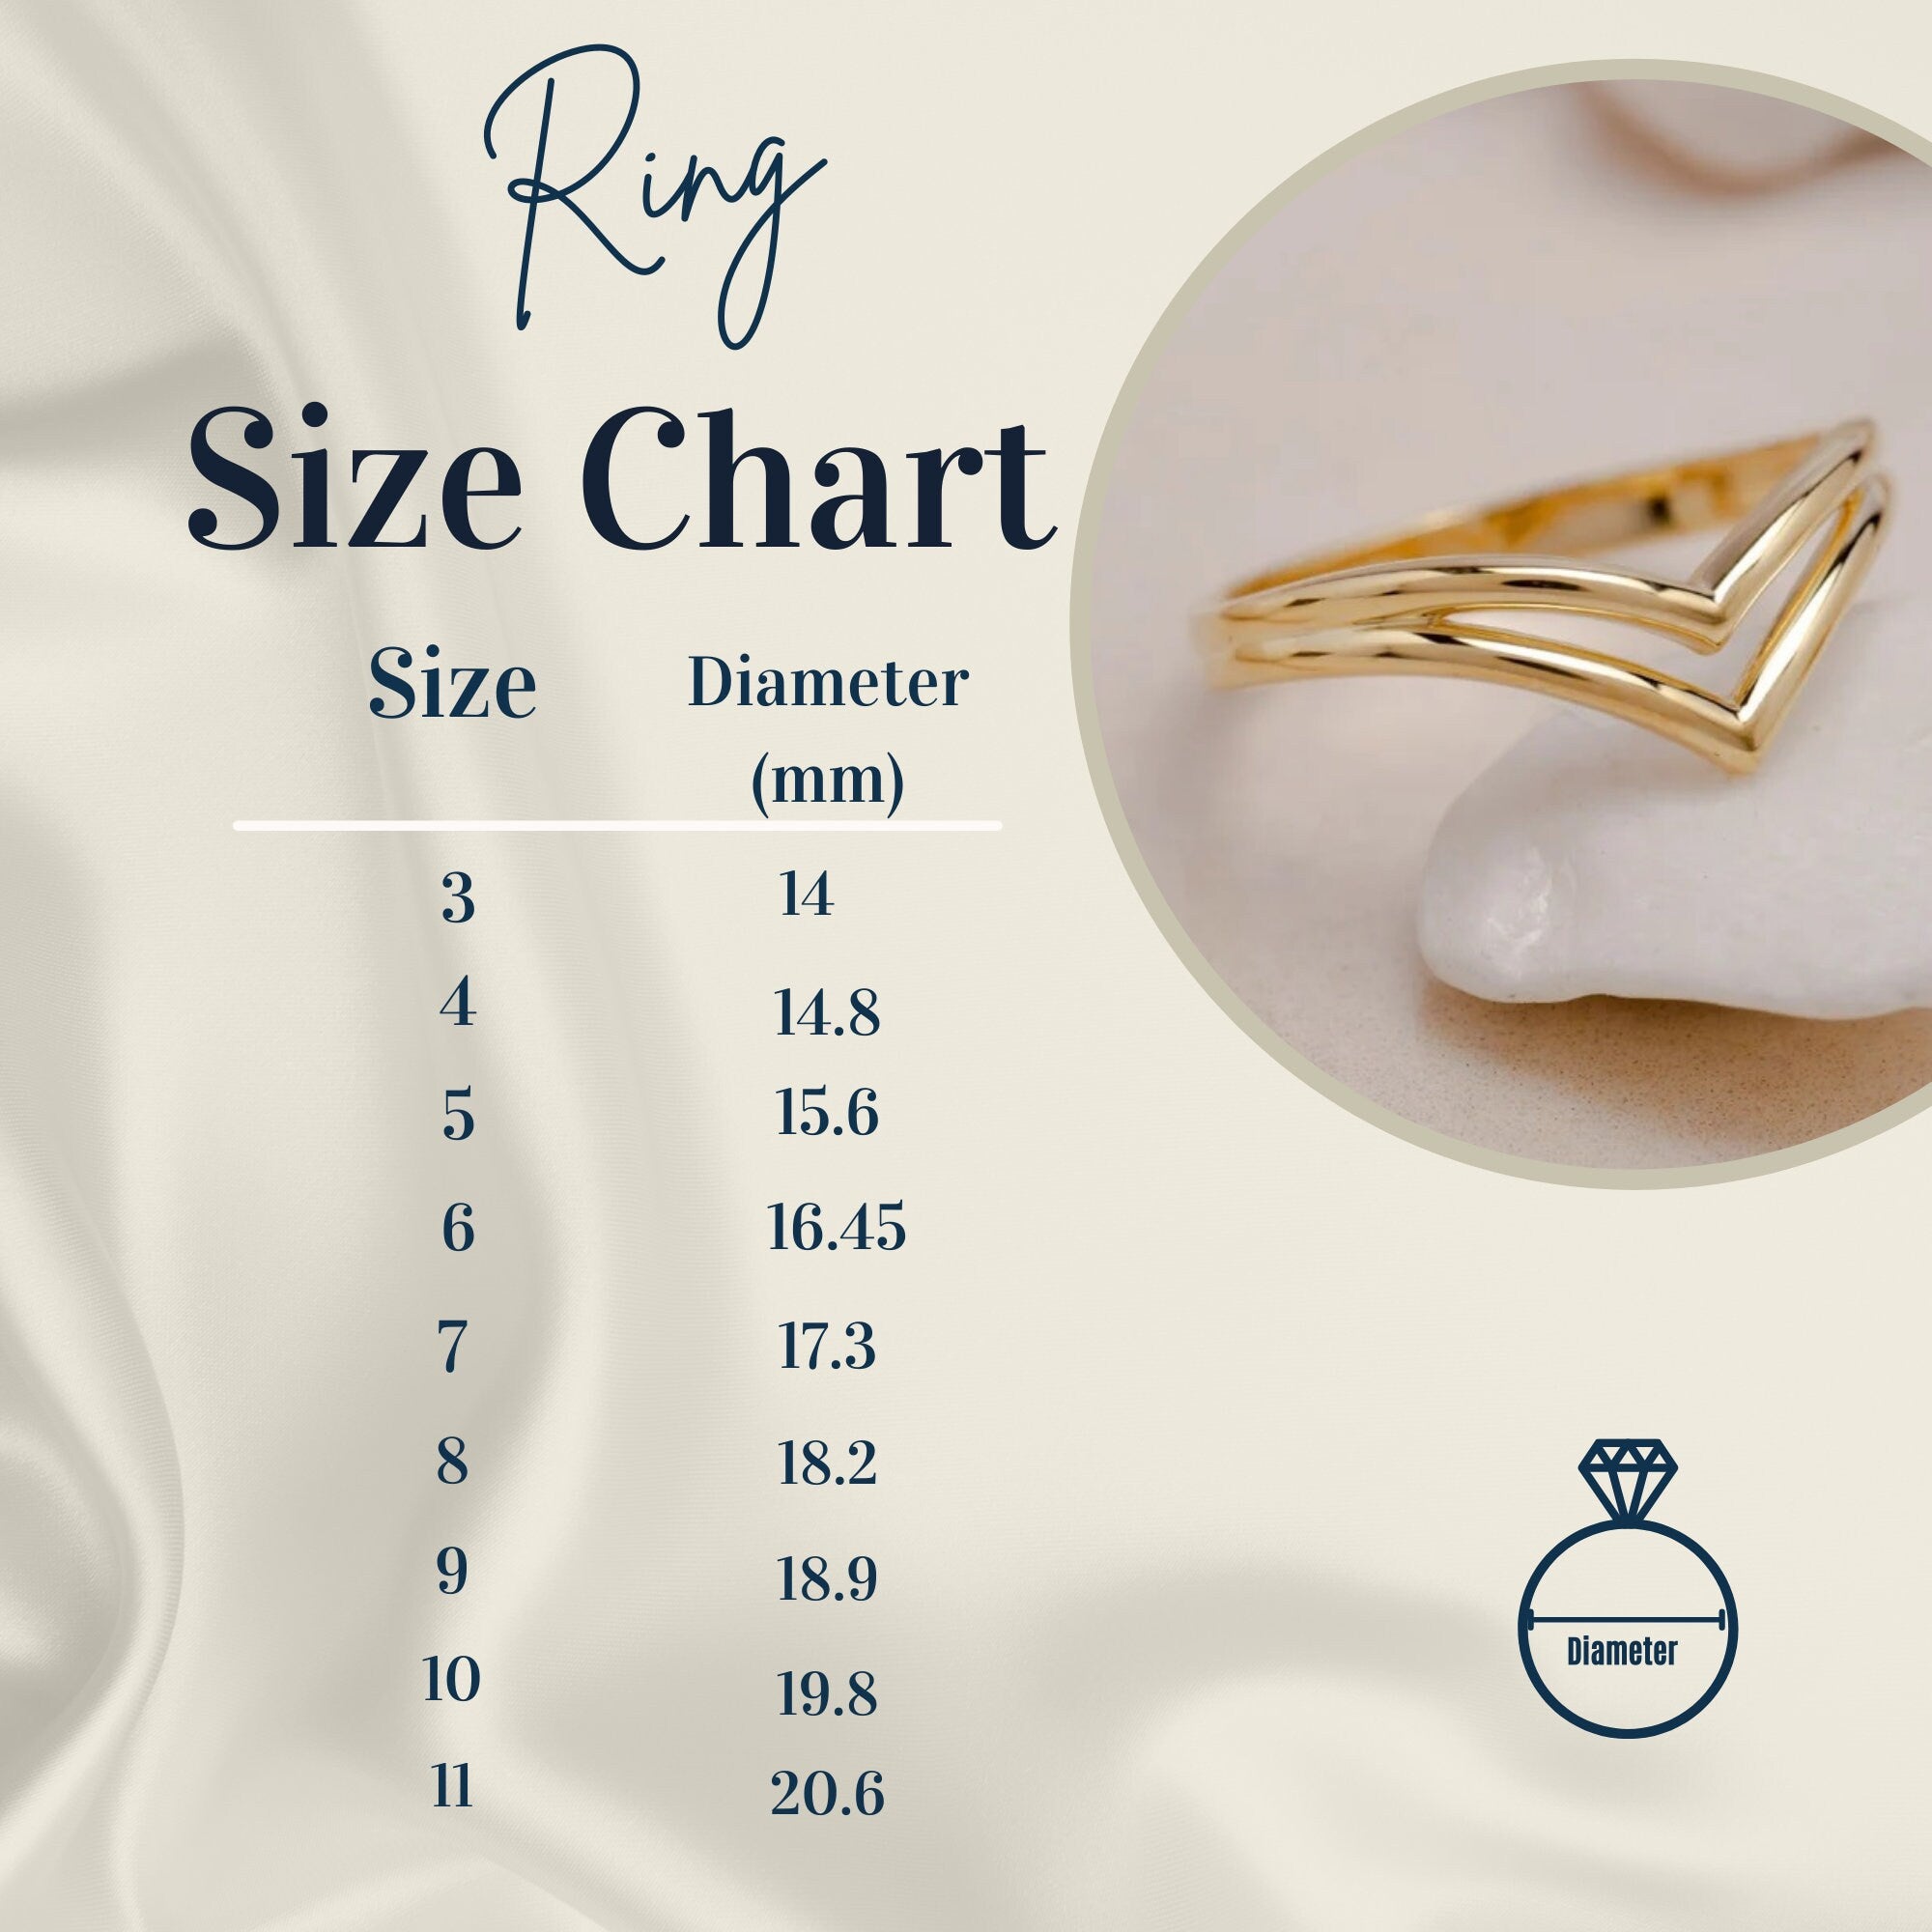 Zig zag Ring Gold, 14K Gold Wave Ring, 925 Silver Zigzag Ring , Gold Stacking Ring, Ring For Her, Gift For Mother Day, Mother Day Jewelry